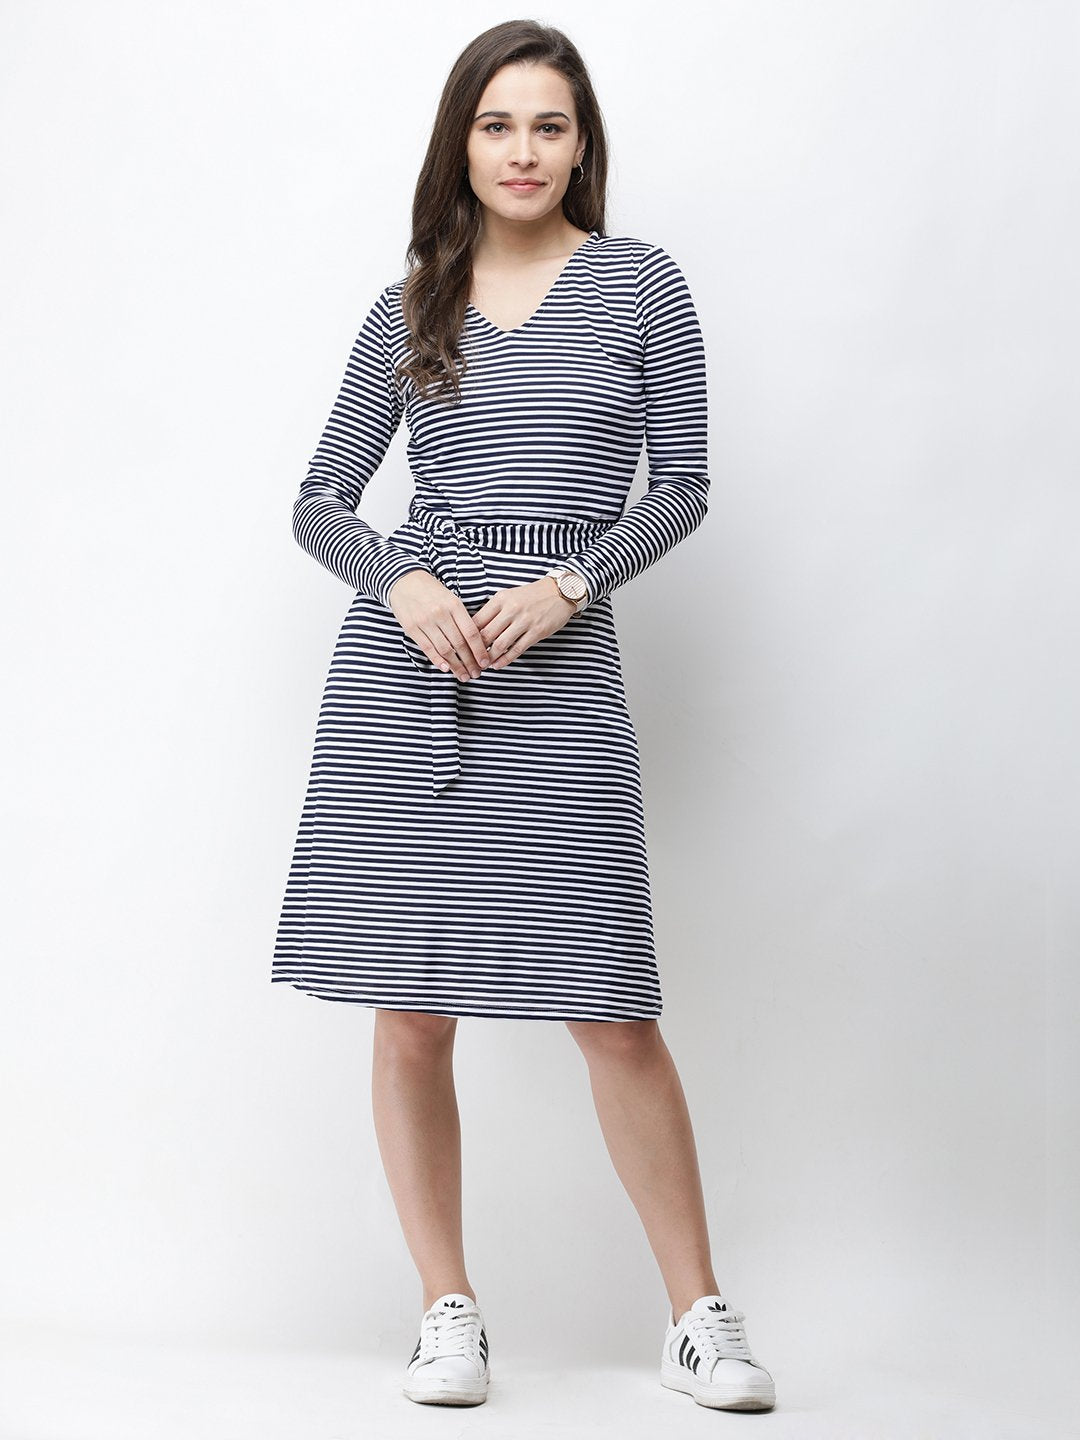 Cation White and Blue Stripes Dress